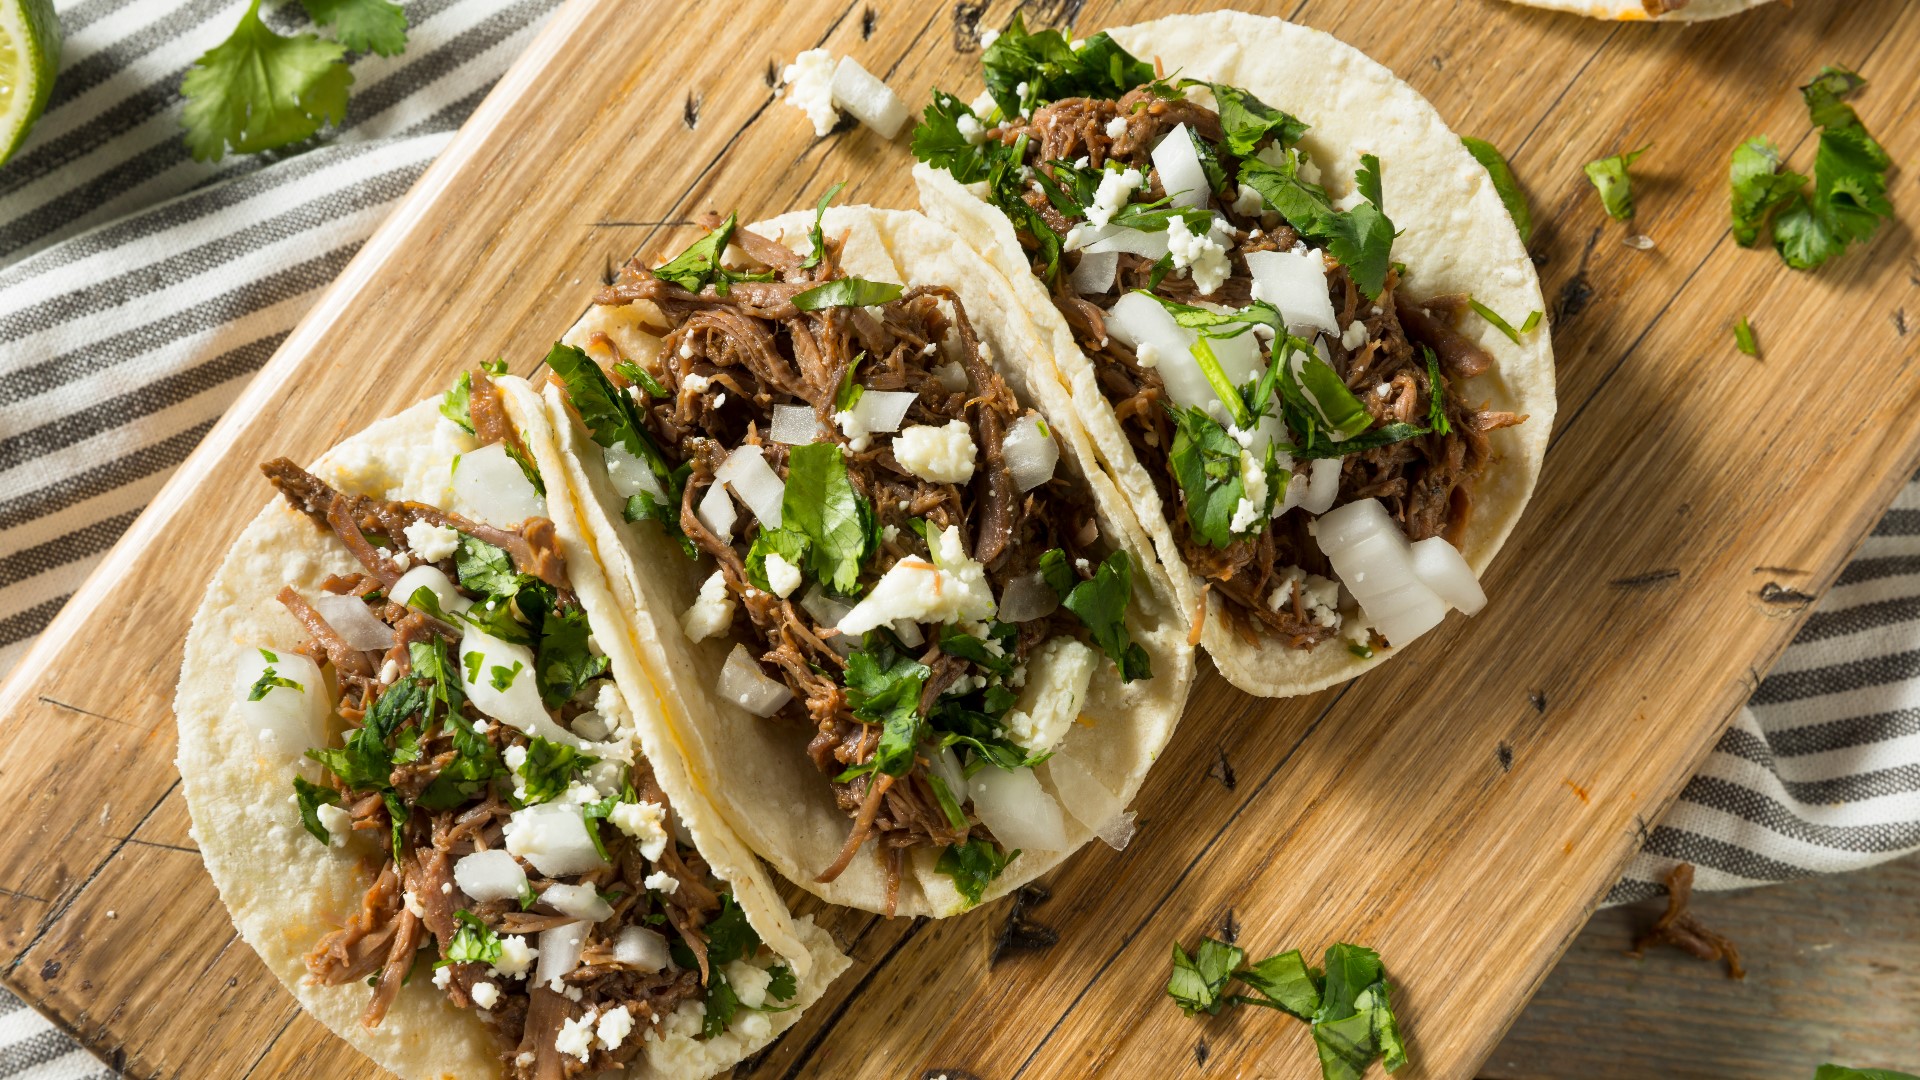 Cleveland Taco Week is coming in April | newscentermaine.com